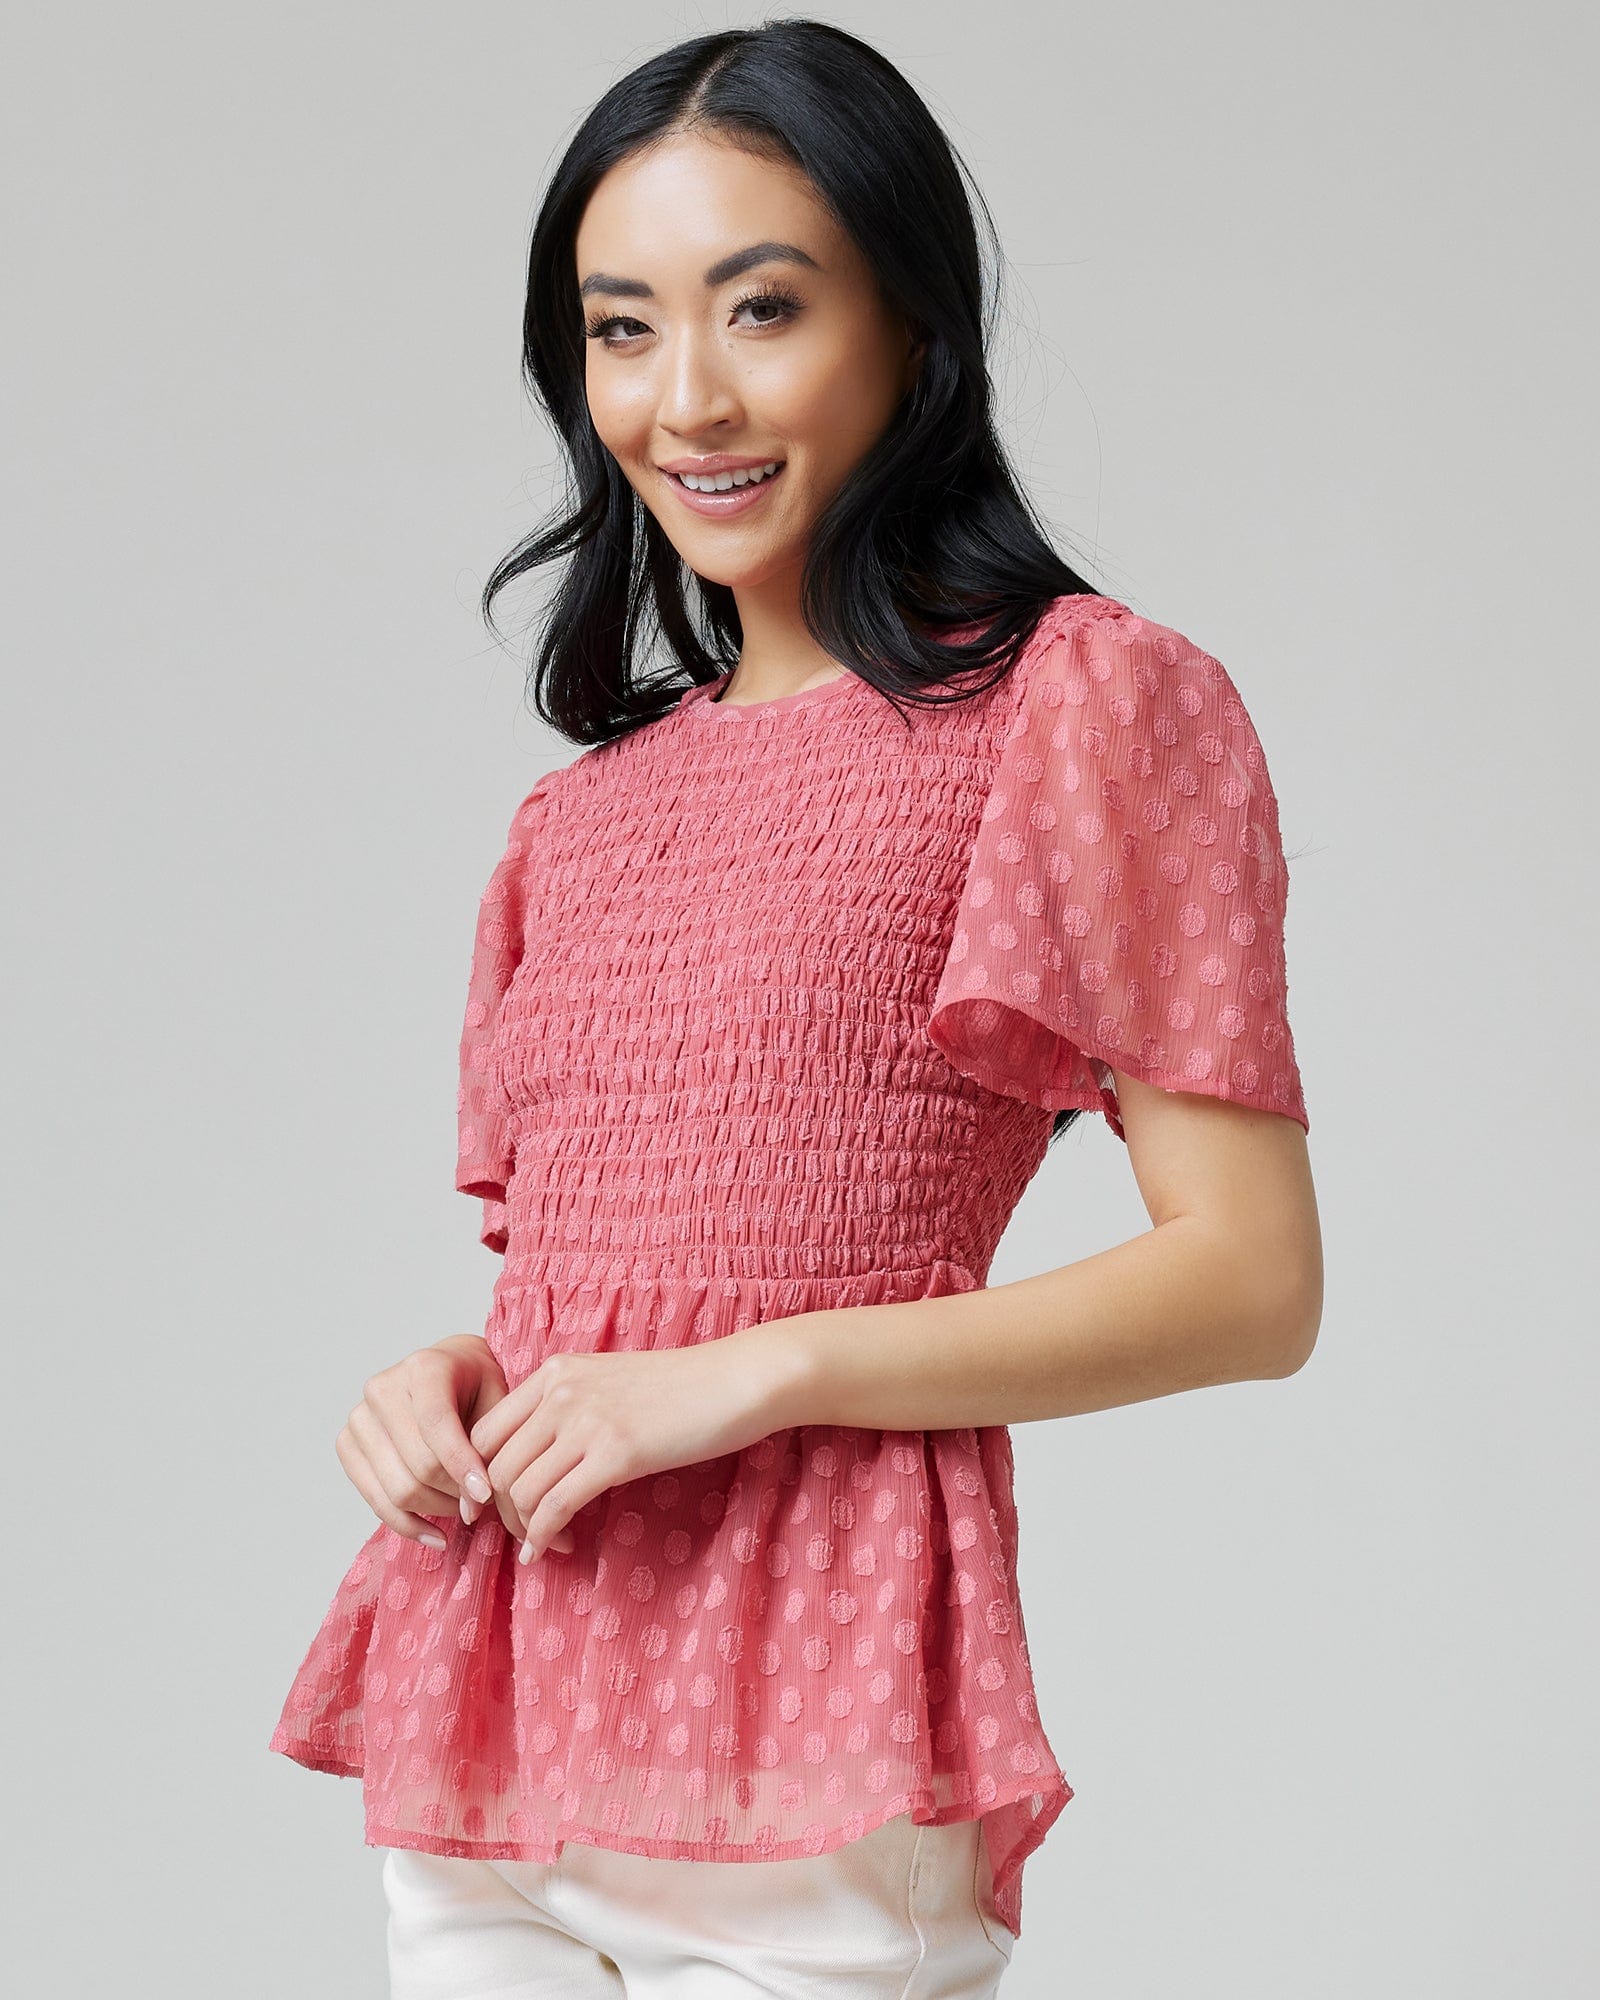 Woman in a pink peplum blouse with short sleeves, smocking and polka dots